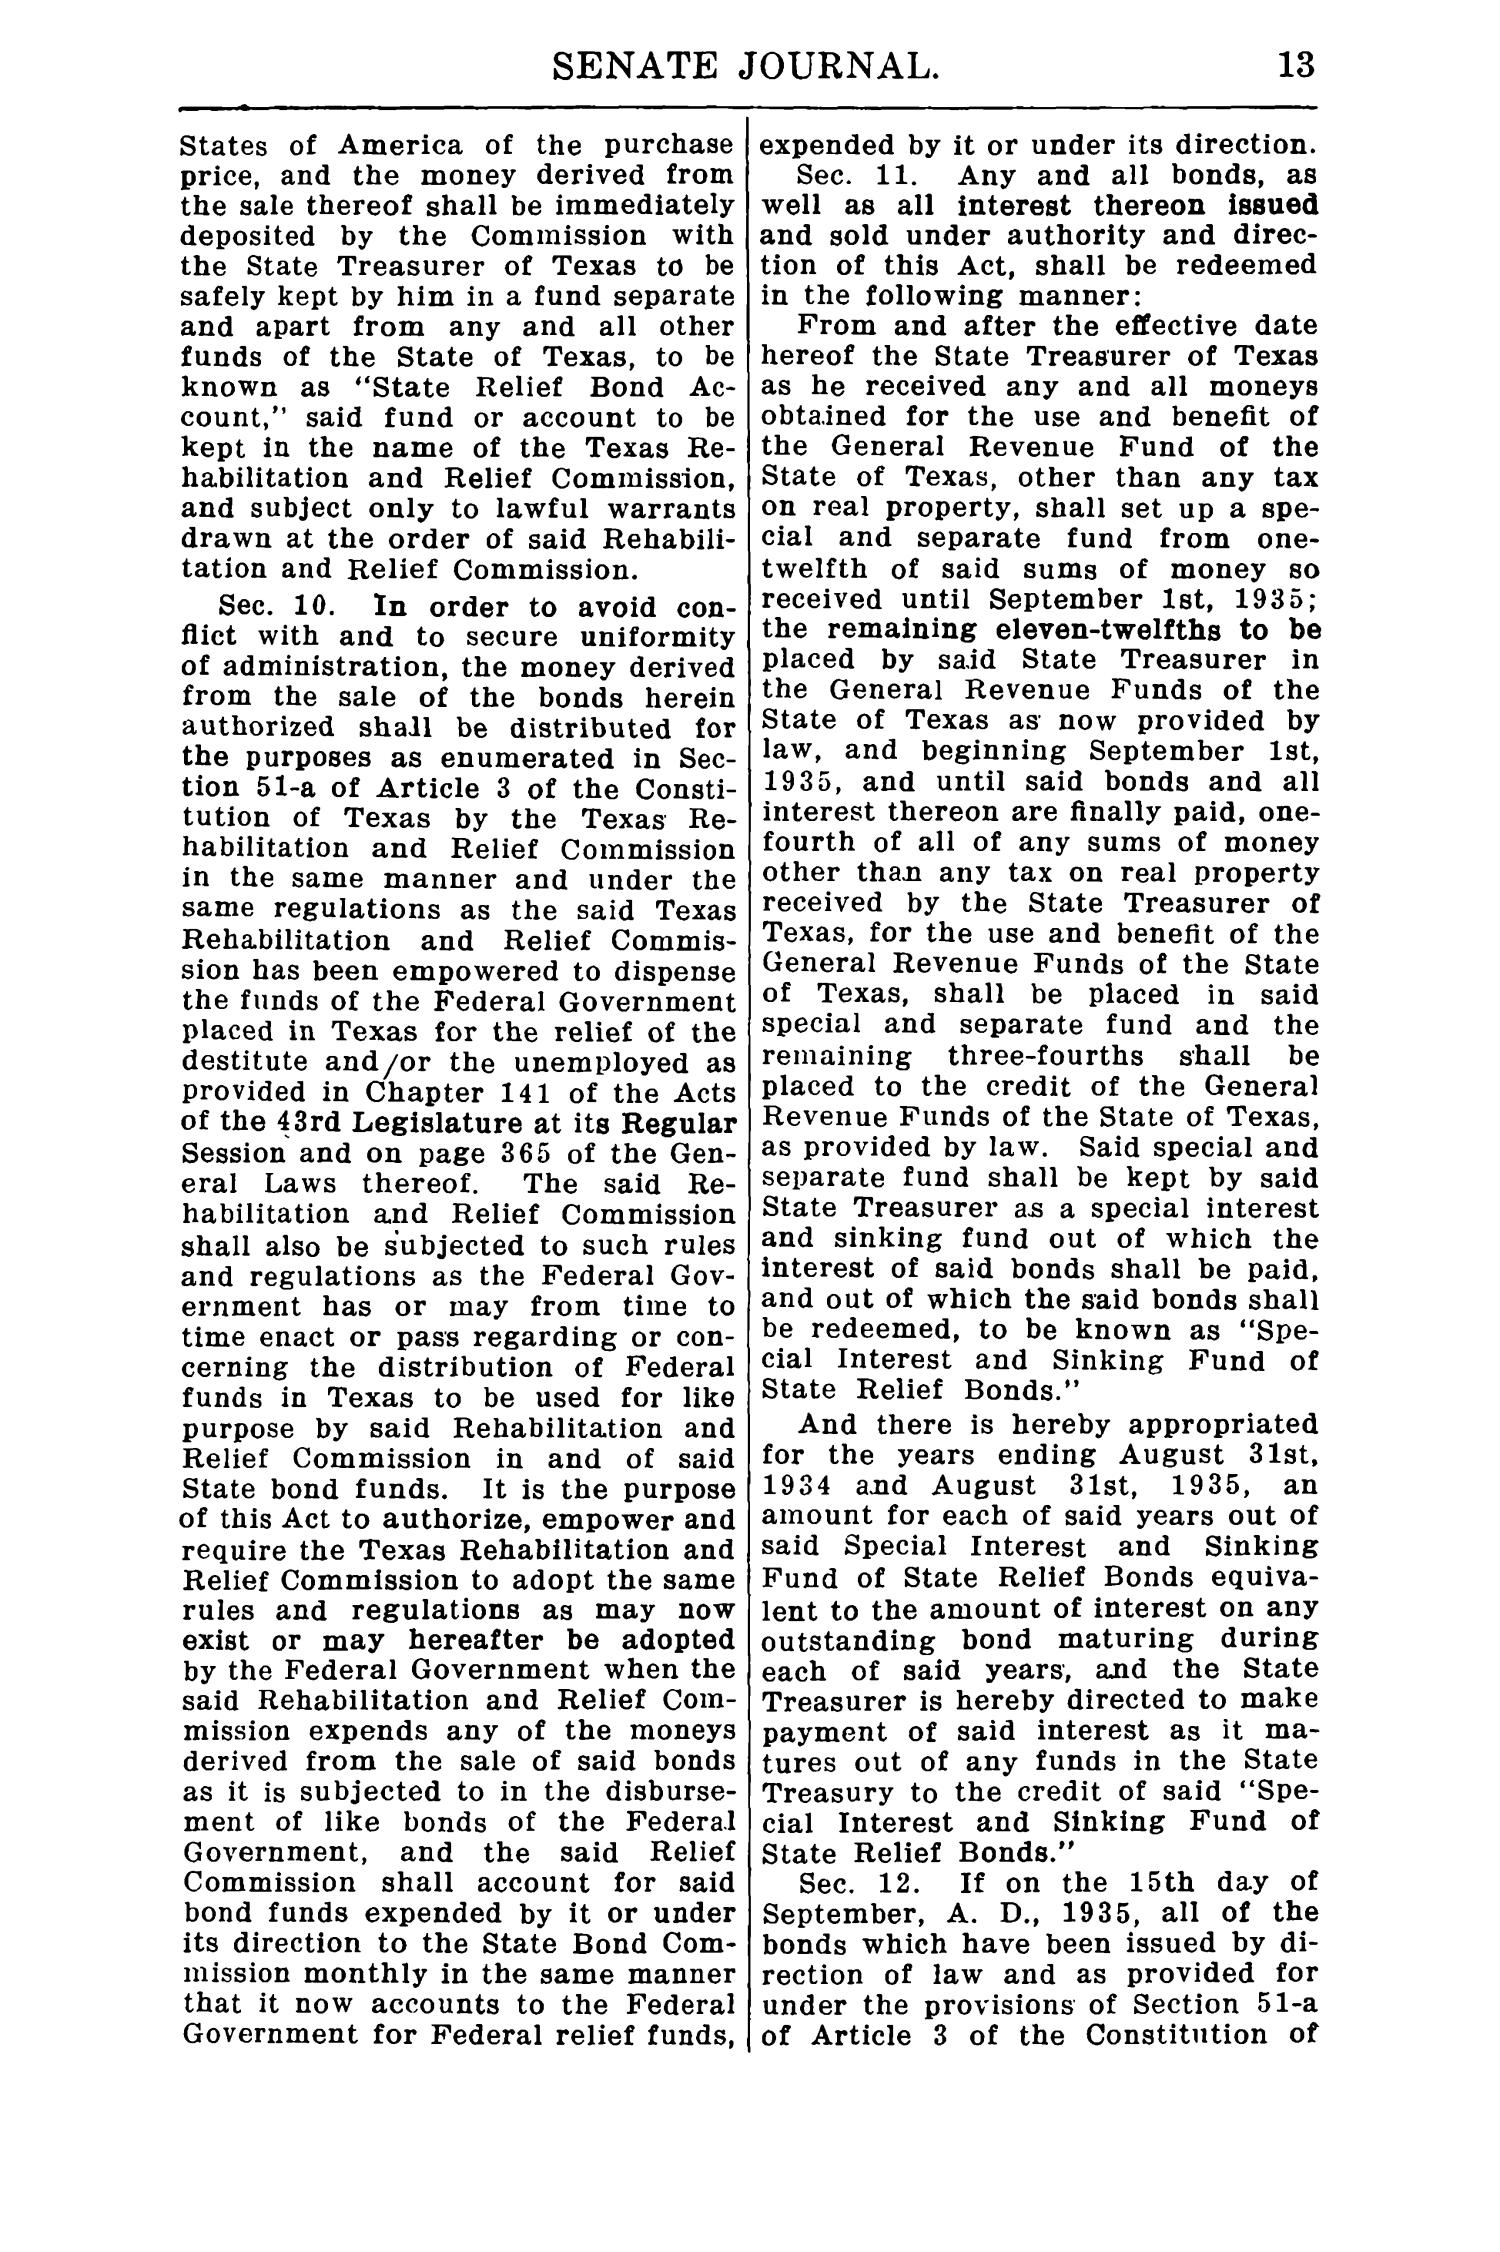 Journal of the Senate of Texas being the First Called Session of the Forty-Third Legislature
                                                
                                                    13
                                                